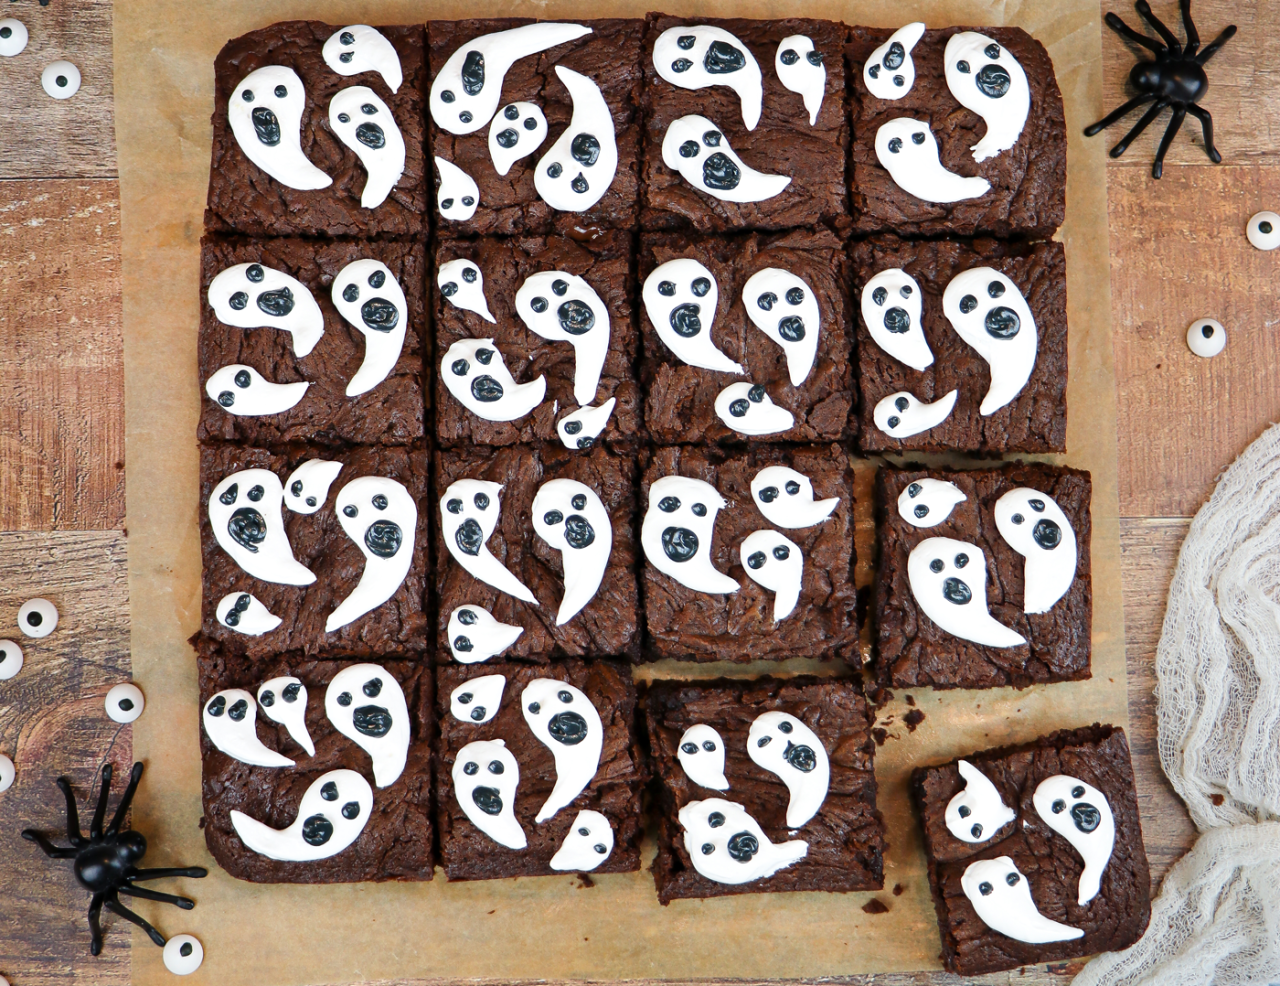 Brownies baked and cut and decorated with ghost designs